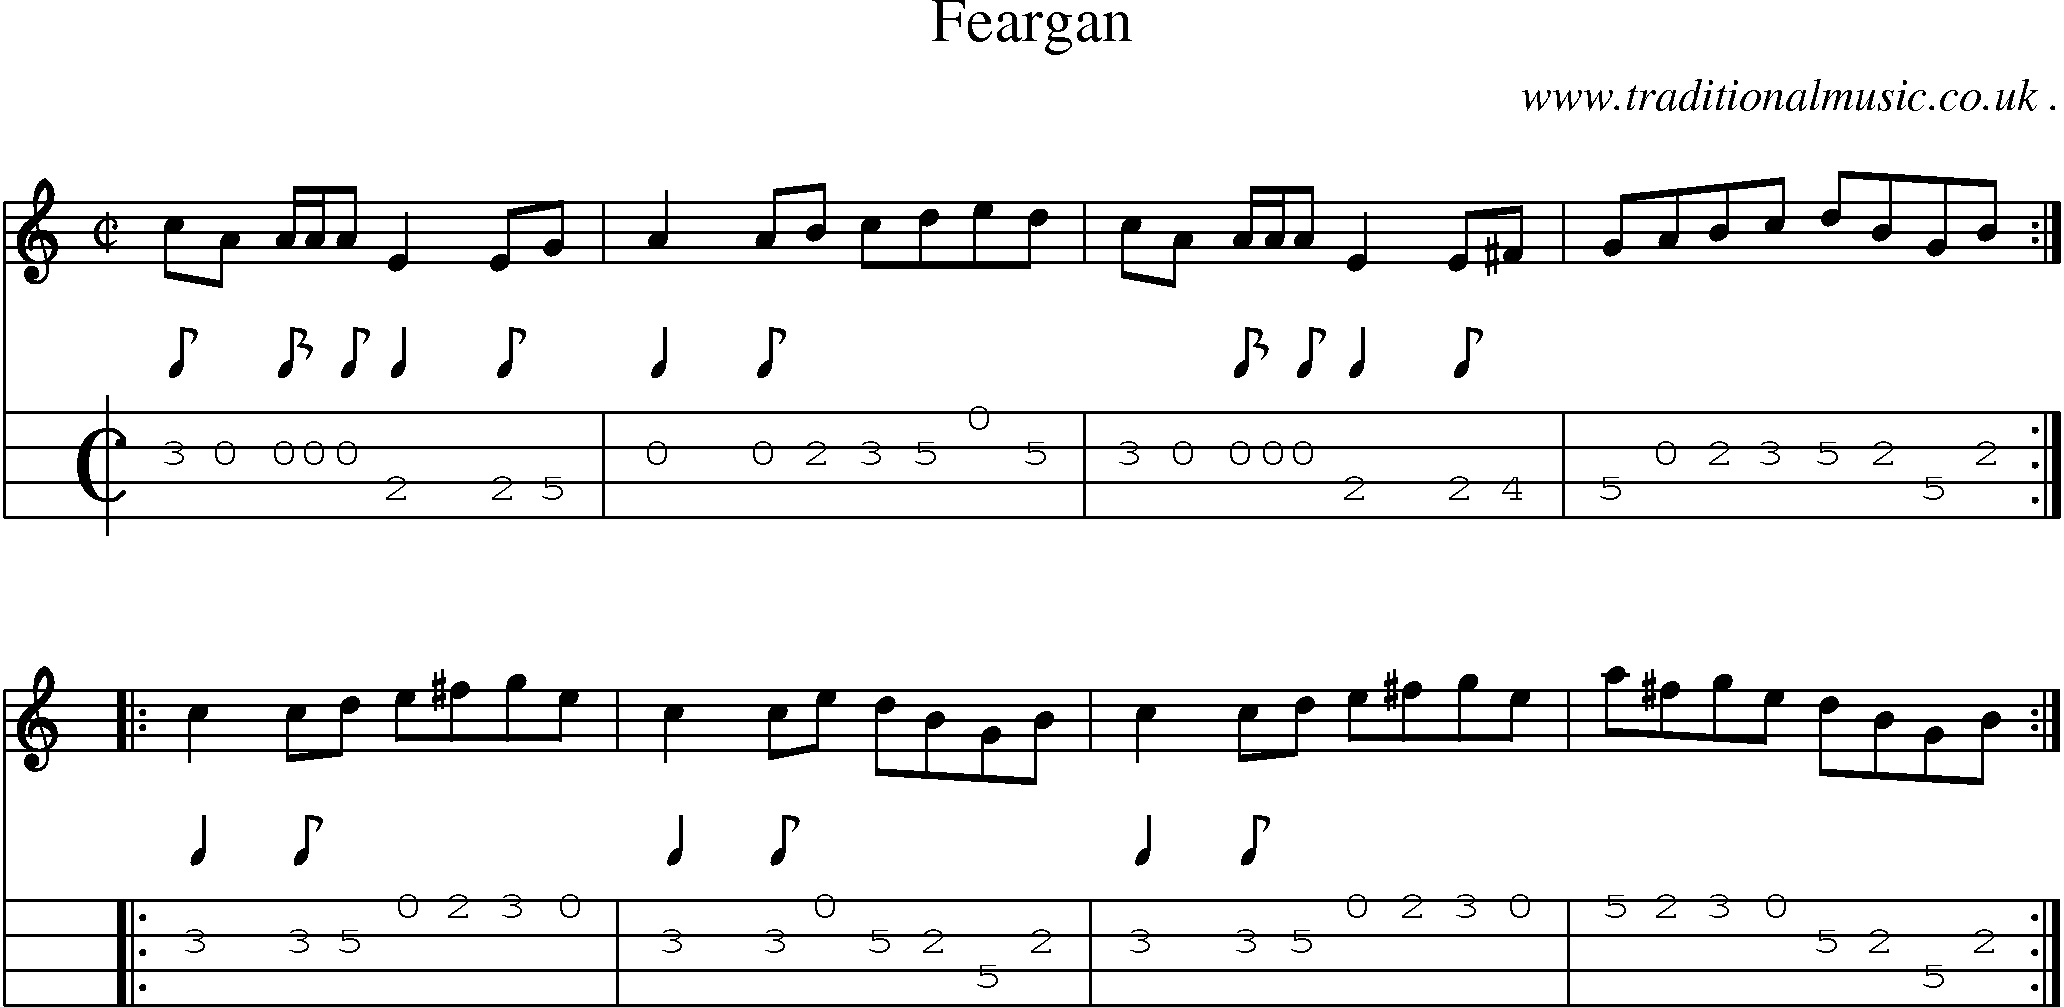 Sheet-music  score, Chords and Mandolin Tabs for Feargan